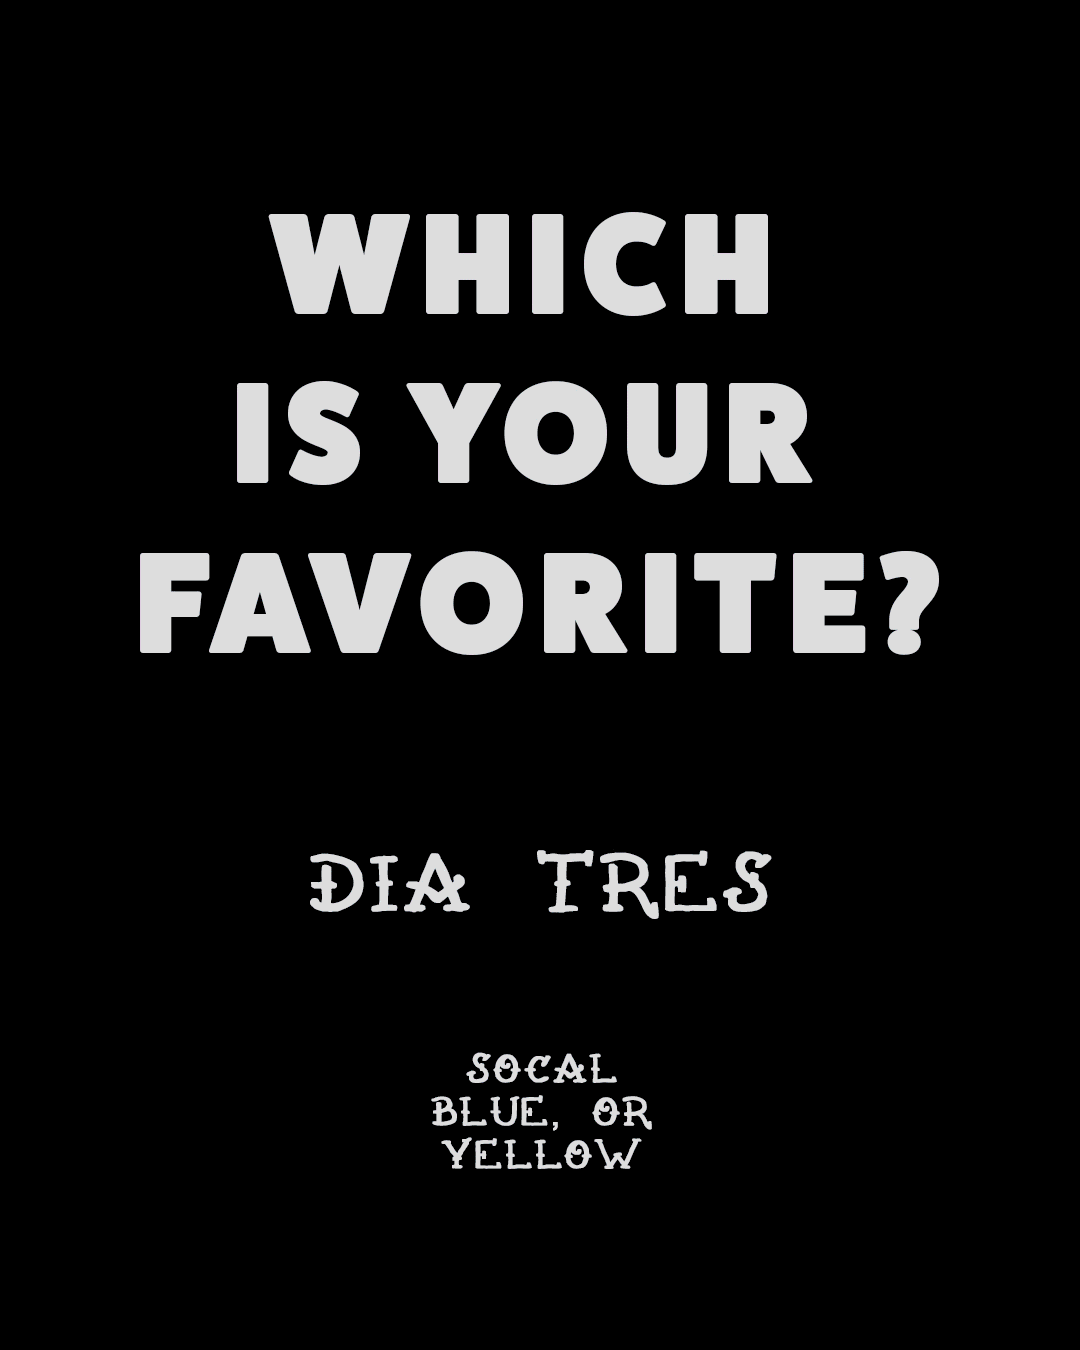 We want to know which color of our new Dia Tres jersey is your favorite!